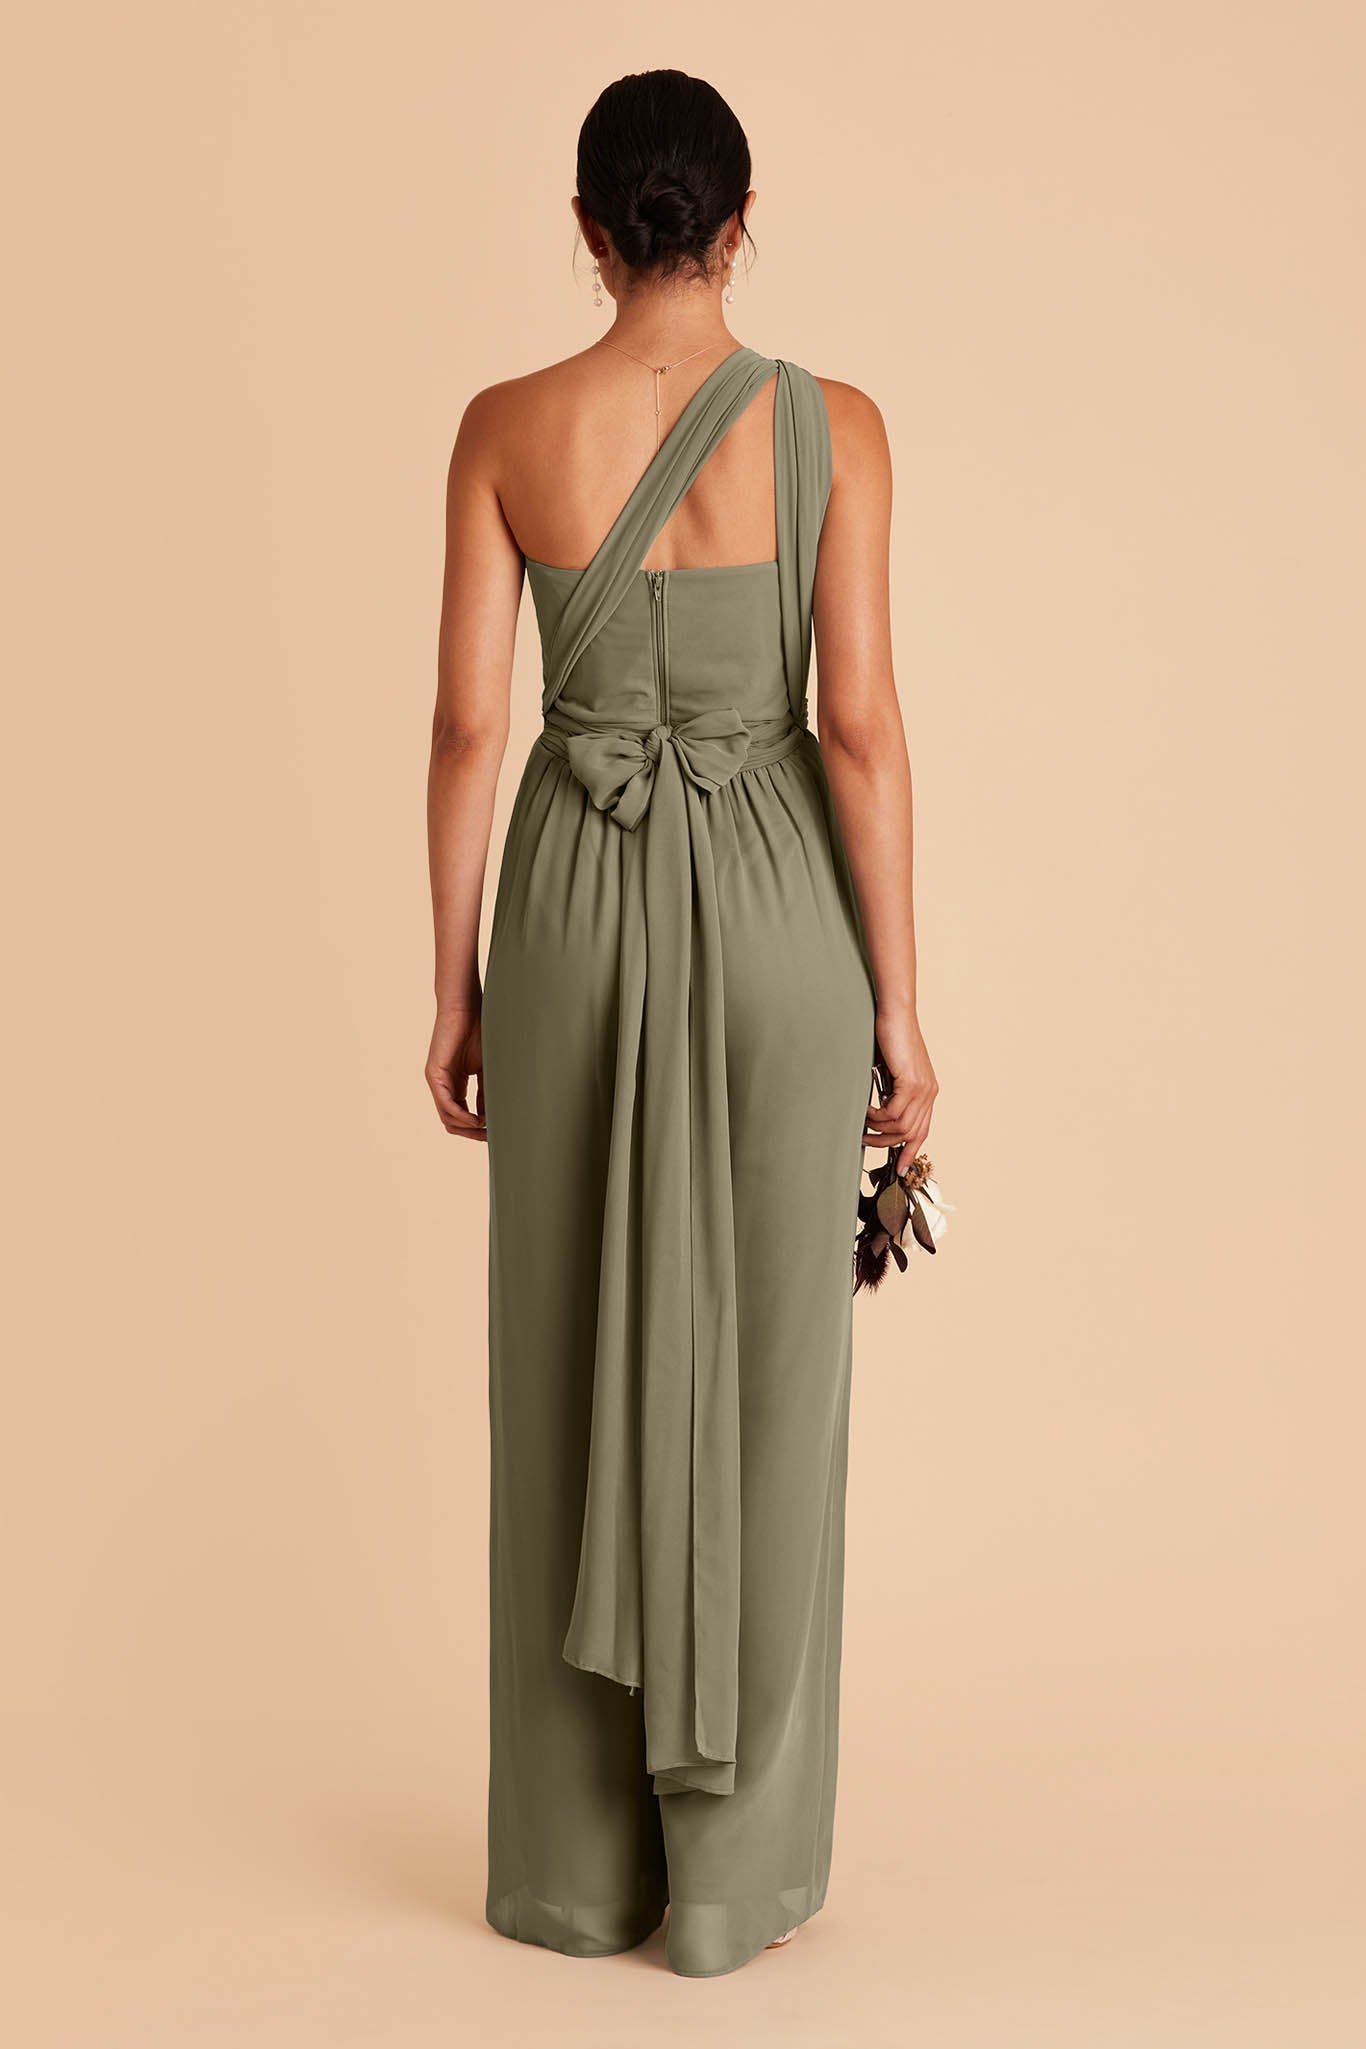 Light green wedding jumpsuit with sweetheart bodice with convertible neckline tie in the back